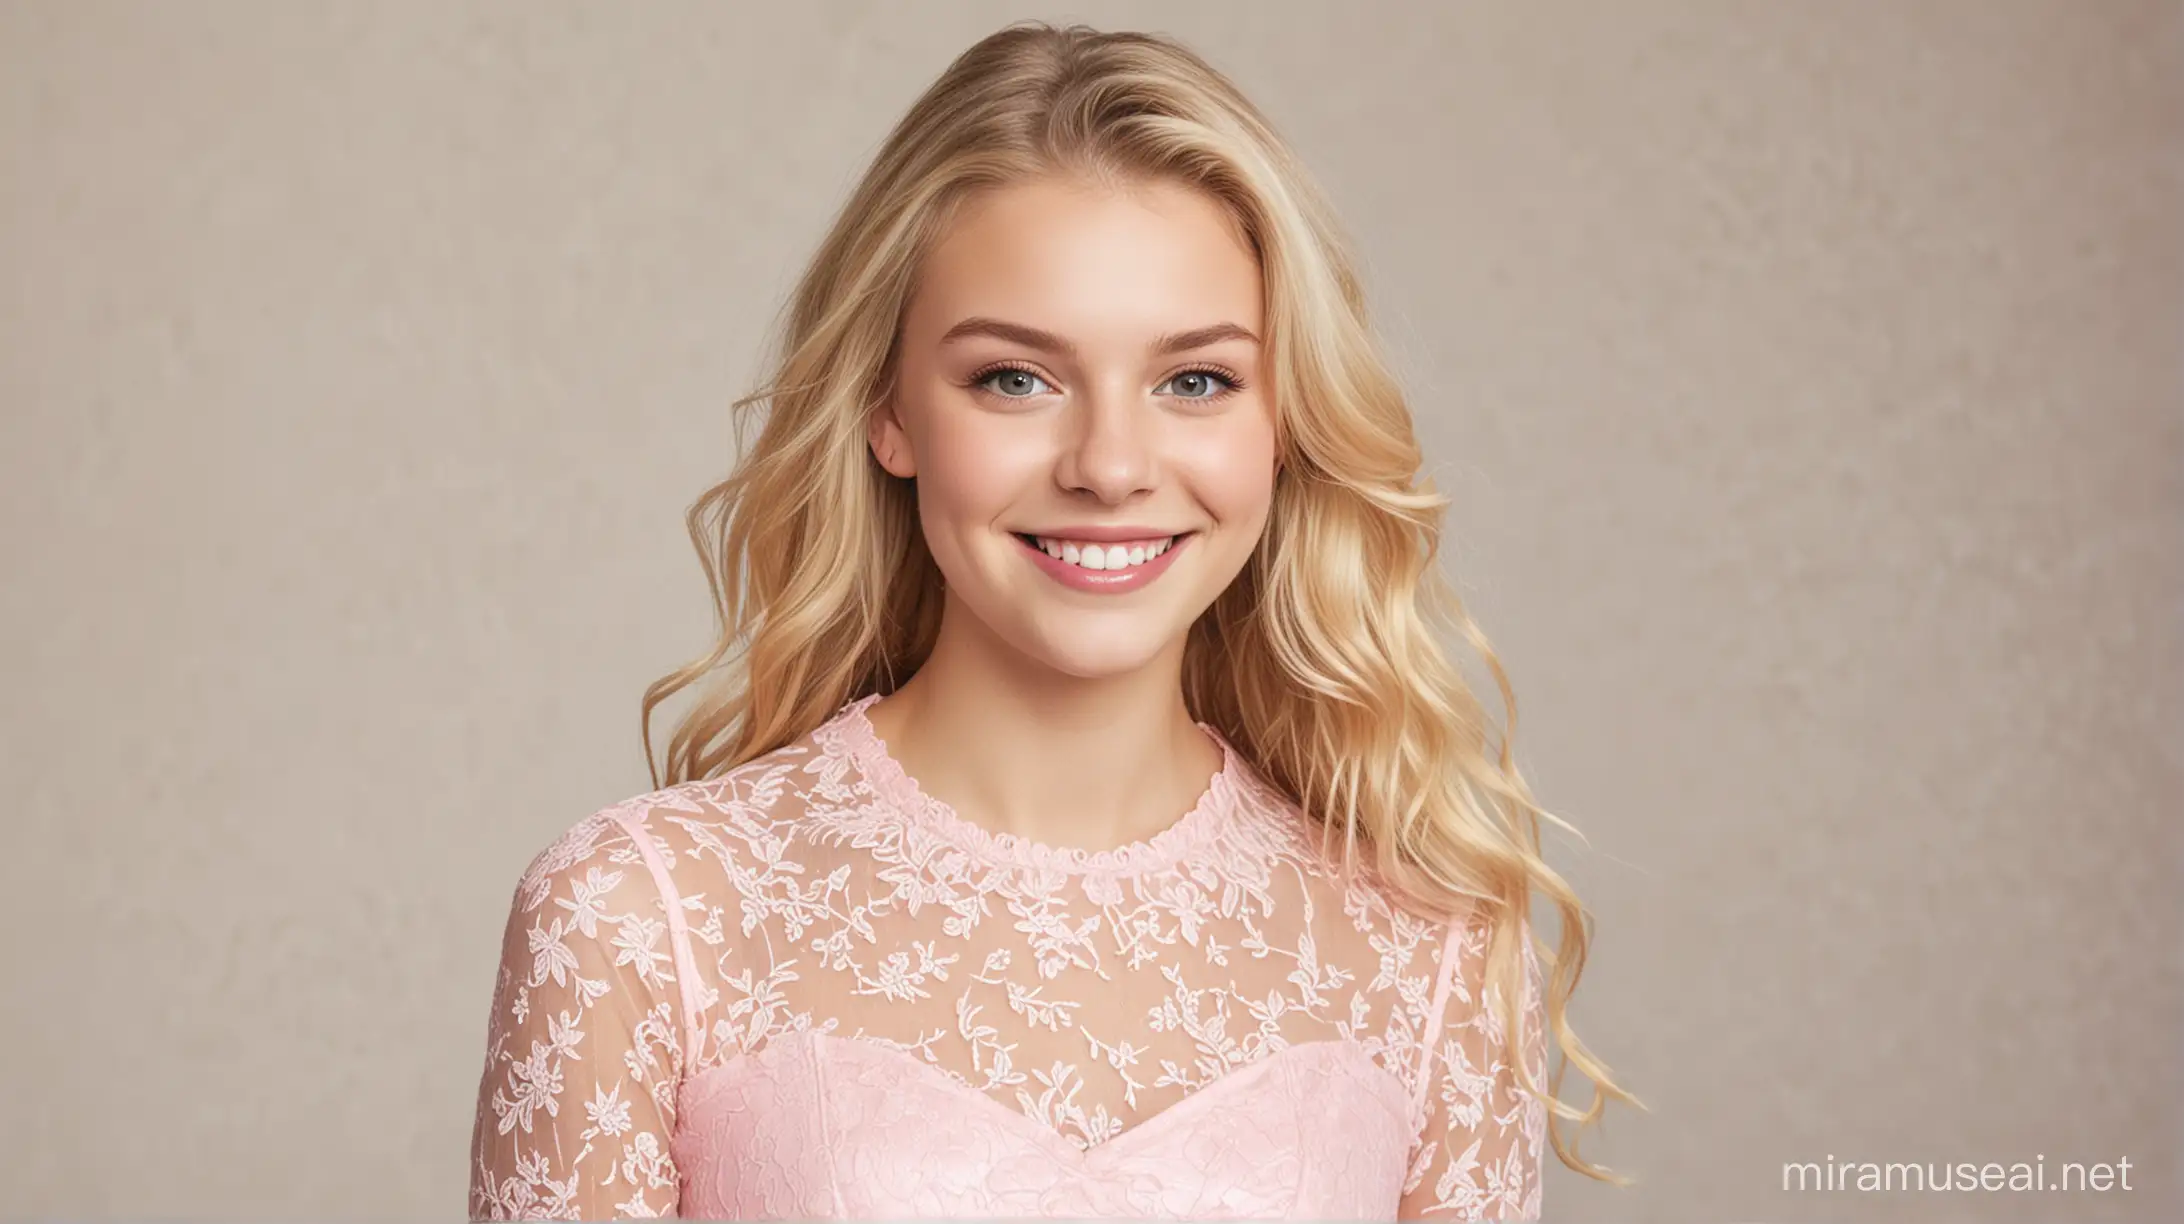 Smiling Teenage Girl in Pink Lace Dress